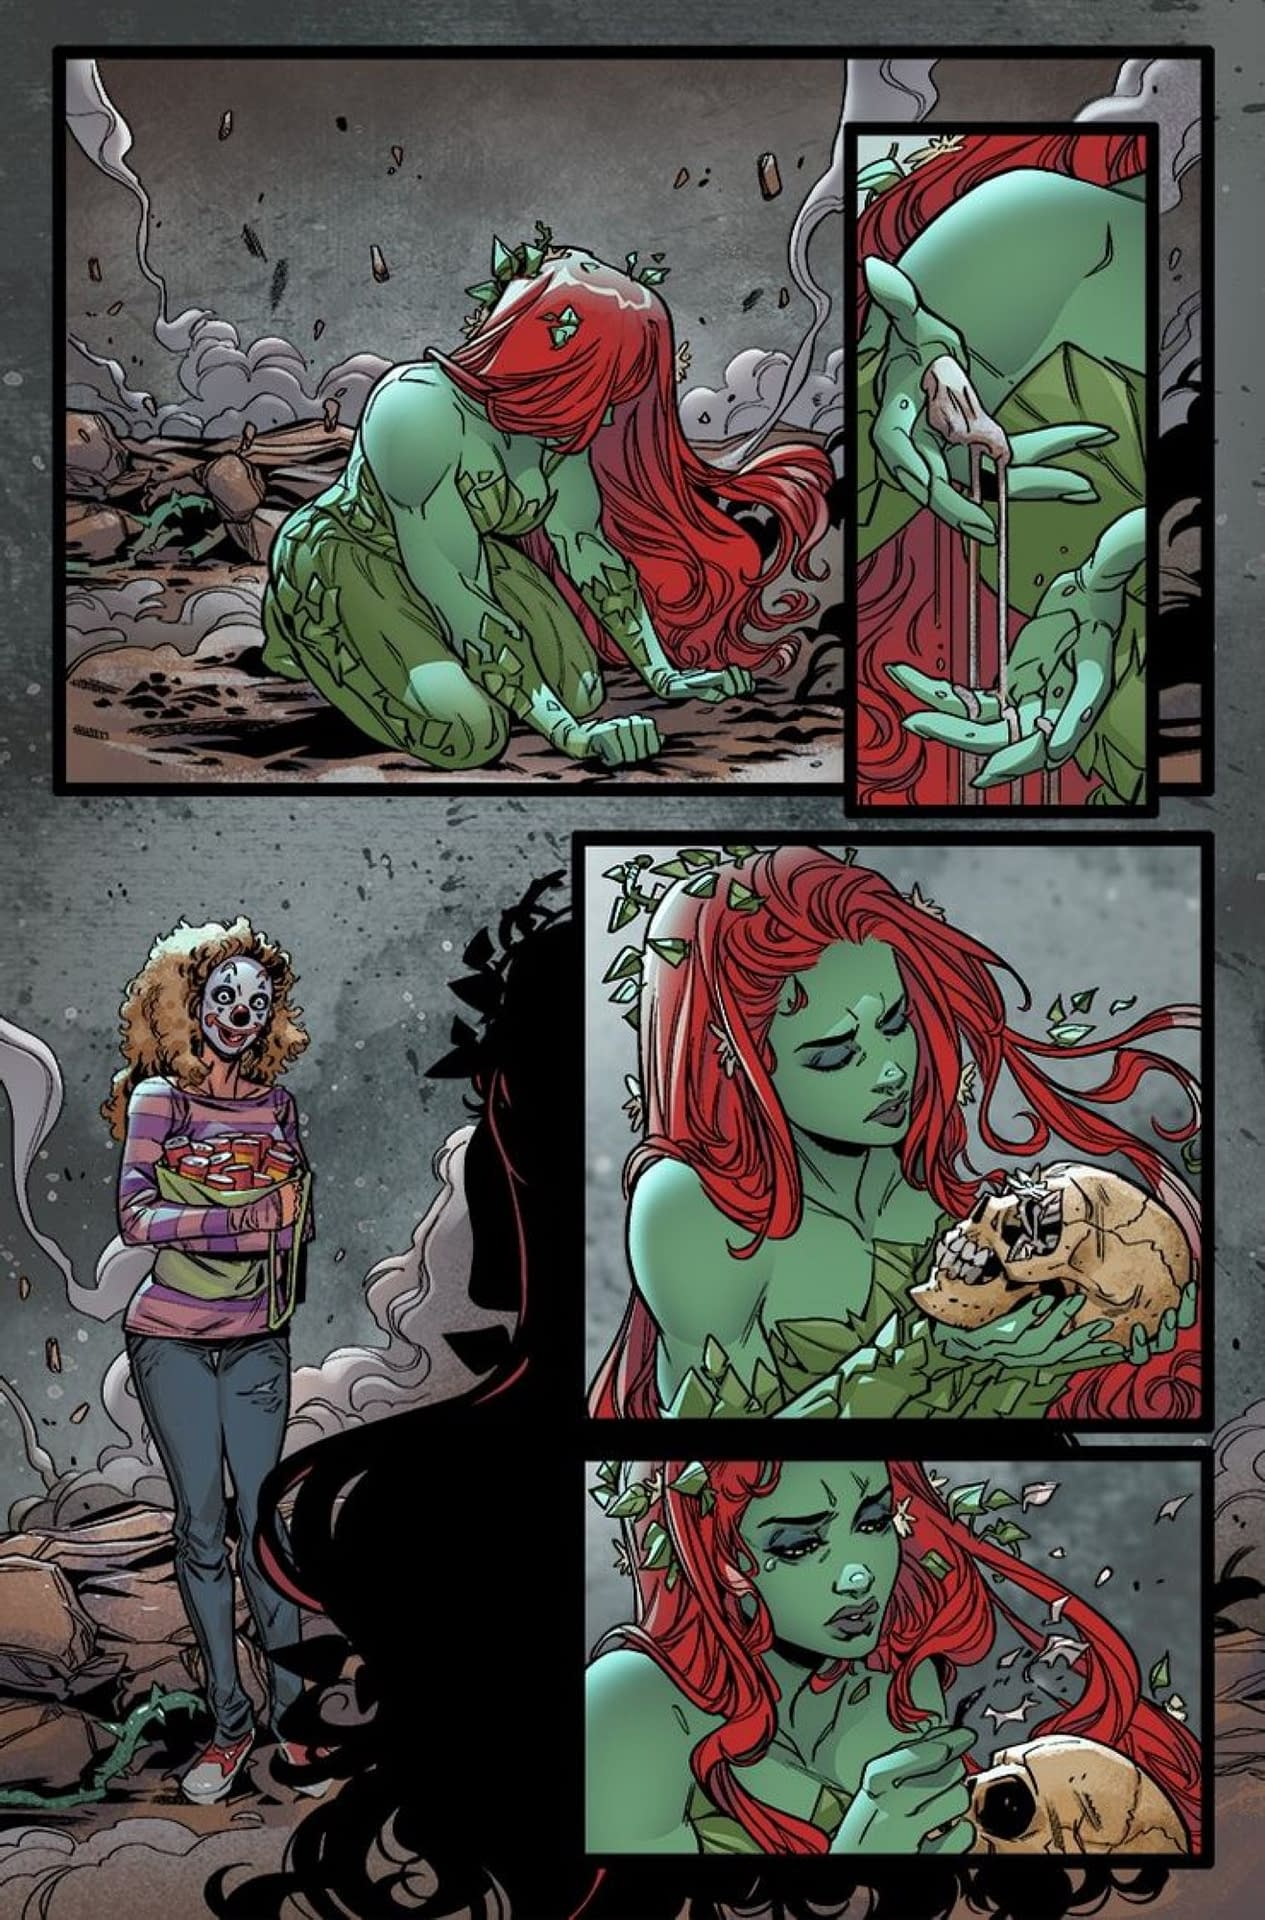 DC Comics 2021 Spoilers: A New Name for Poison Ivy